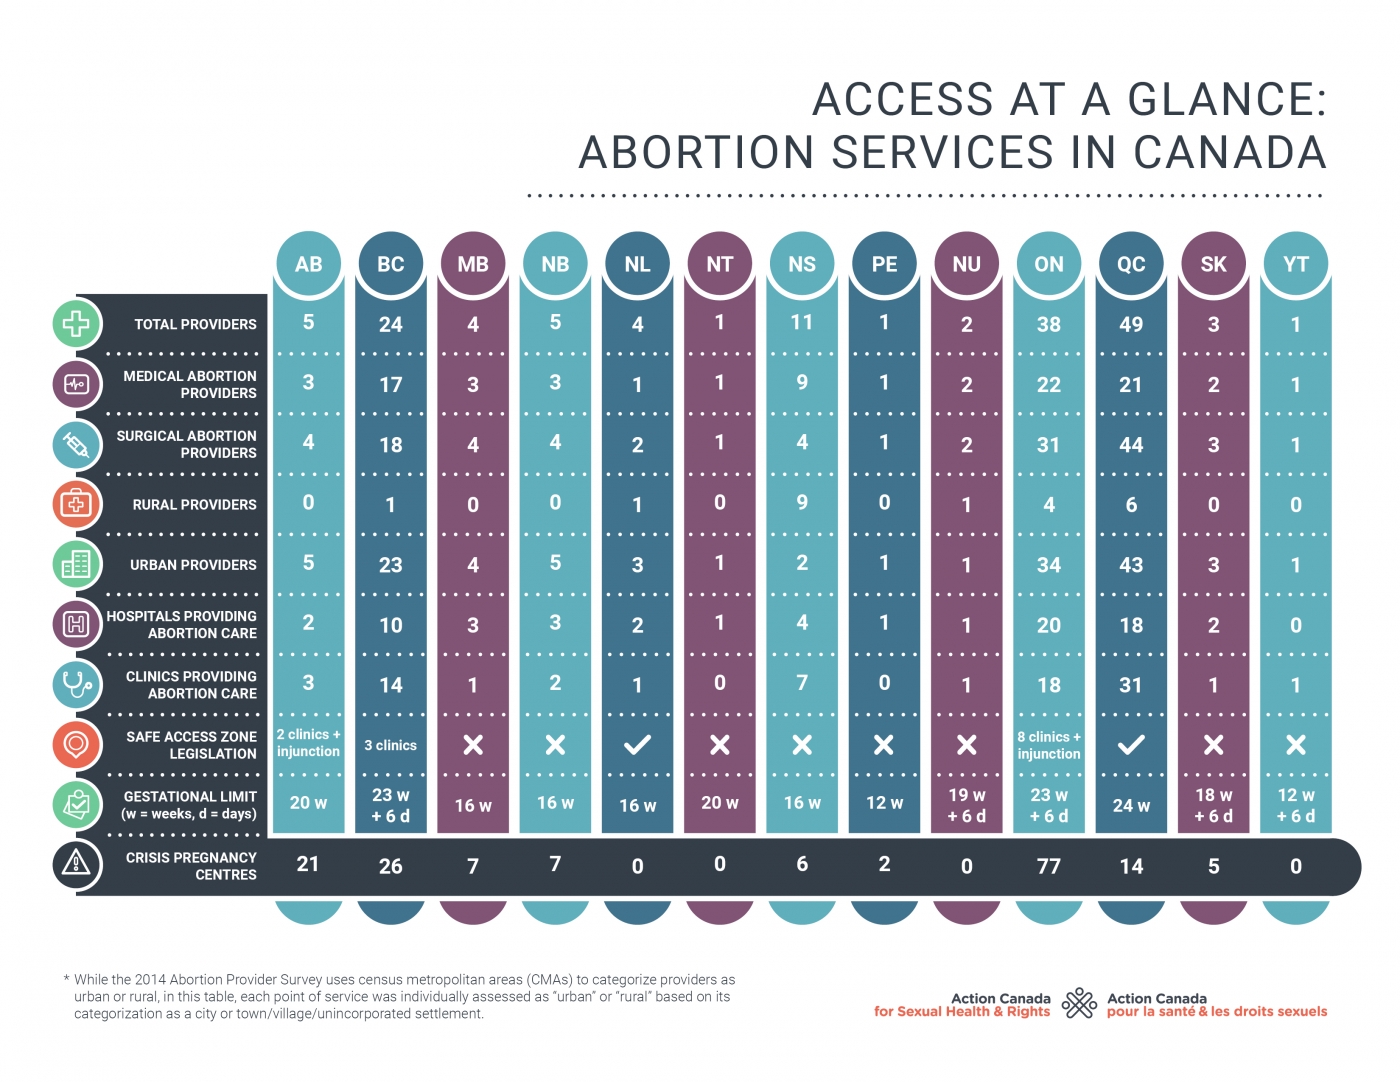 Table representing availability of abortion services in each province and territory of Canada